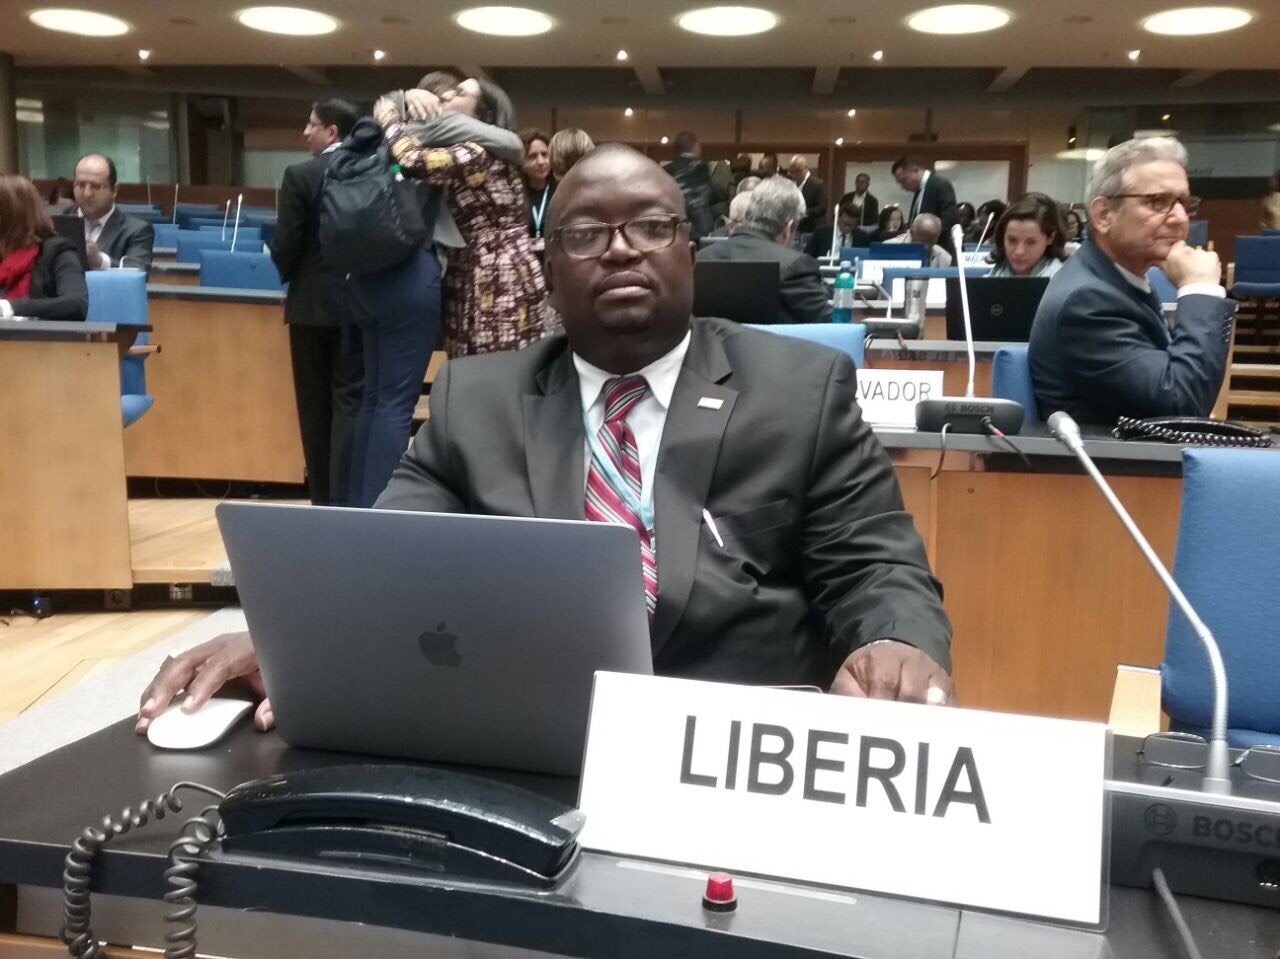 Executive Director of the Environmental Protection Agency (EPA) of Liberia, Nathaniel T. Blama, Sr. attends the United Nations Climate Change Conference from April 30 to May 10, 2018, in Bonn, Germany.